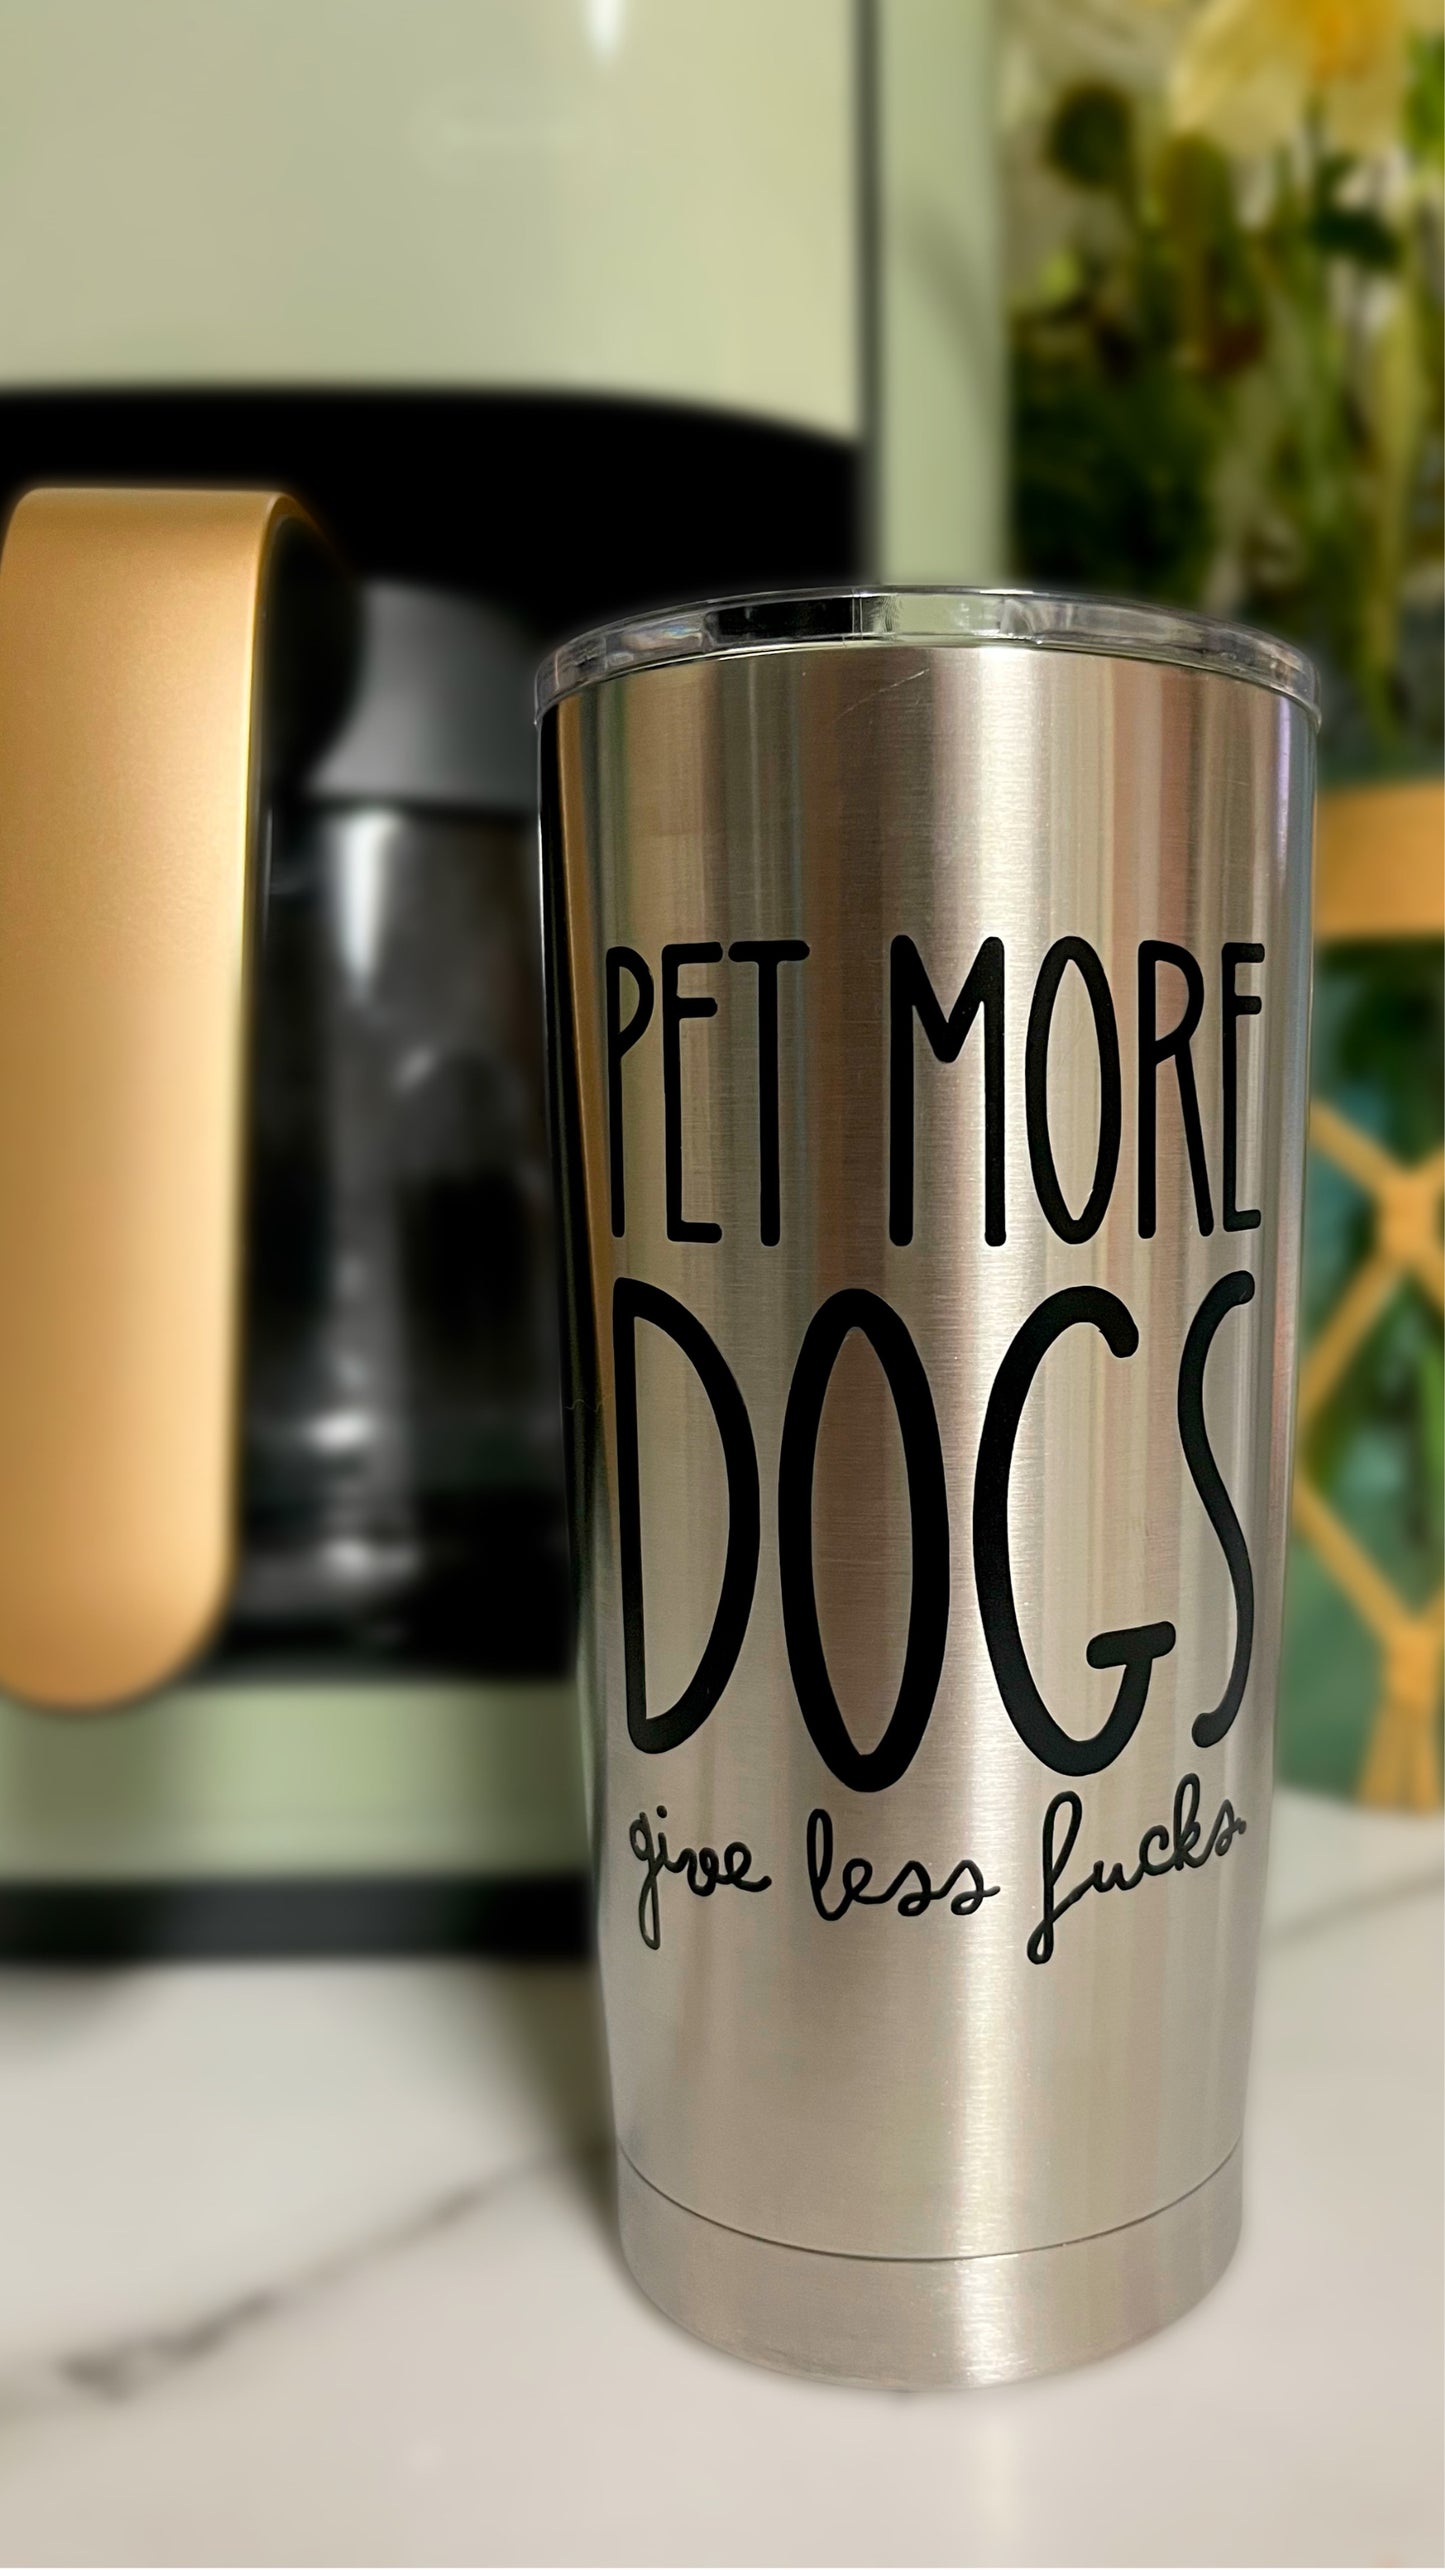 TDFT’s Hand Designed Stainless Steel Tumblers